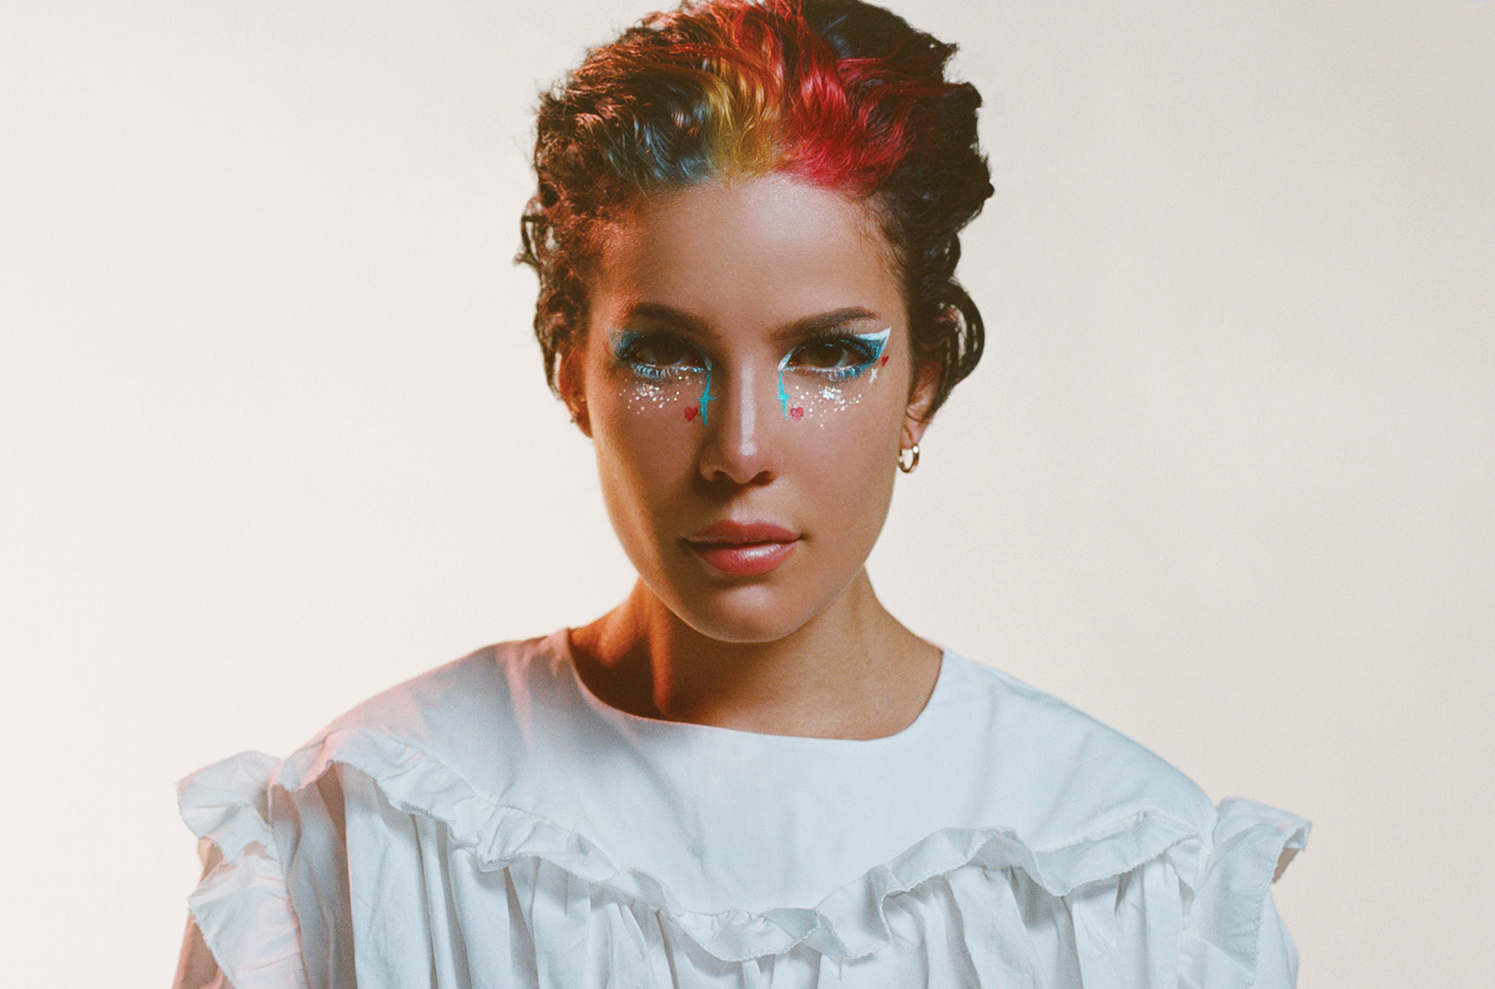 Halsey’s latest album is full of self-love and self-discovery